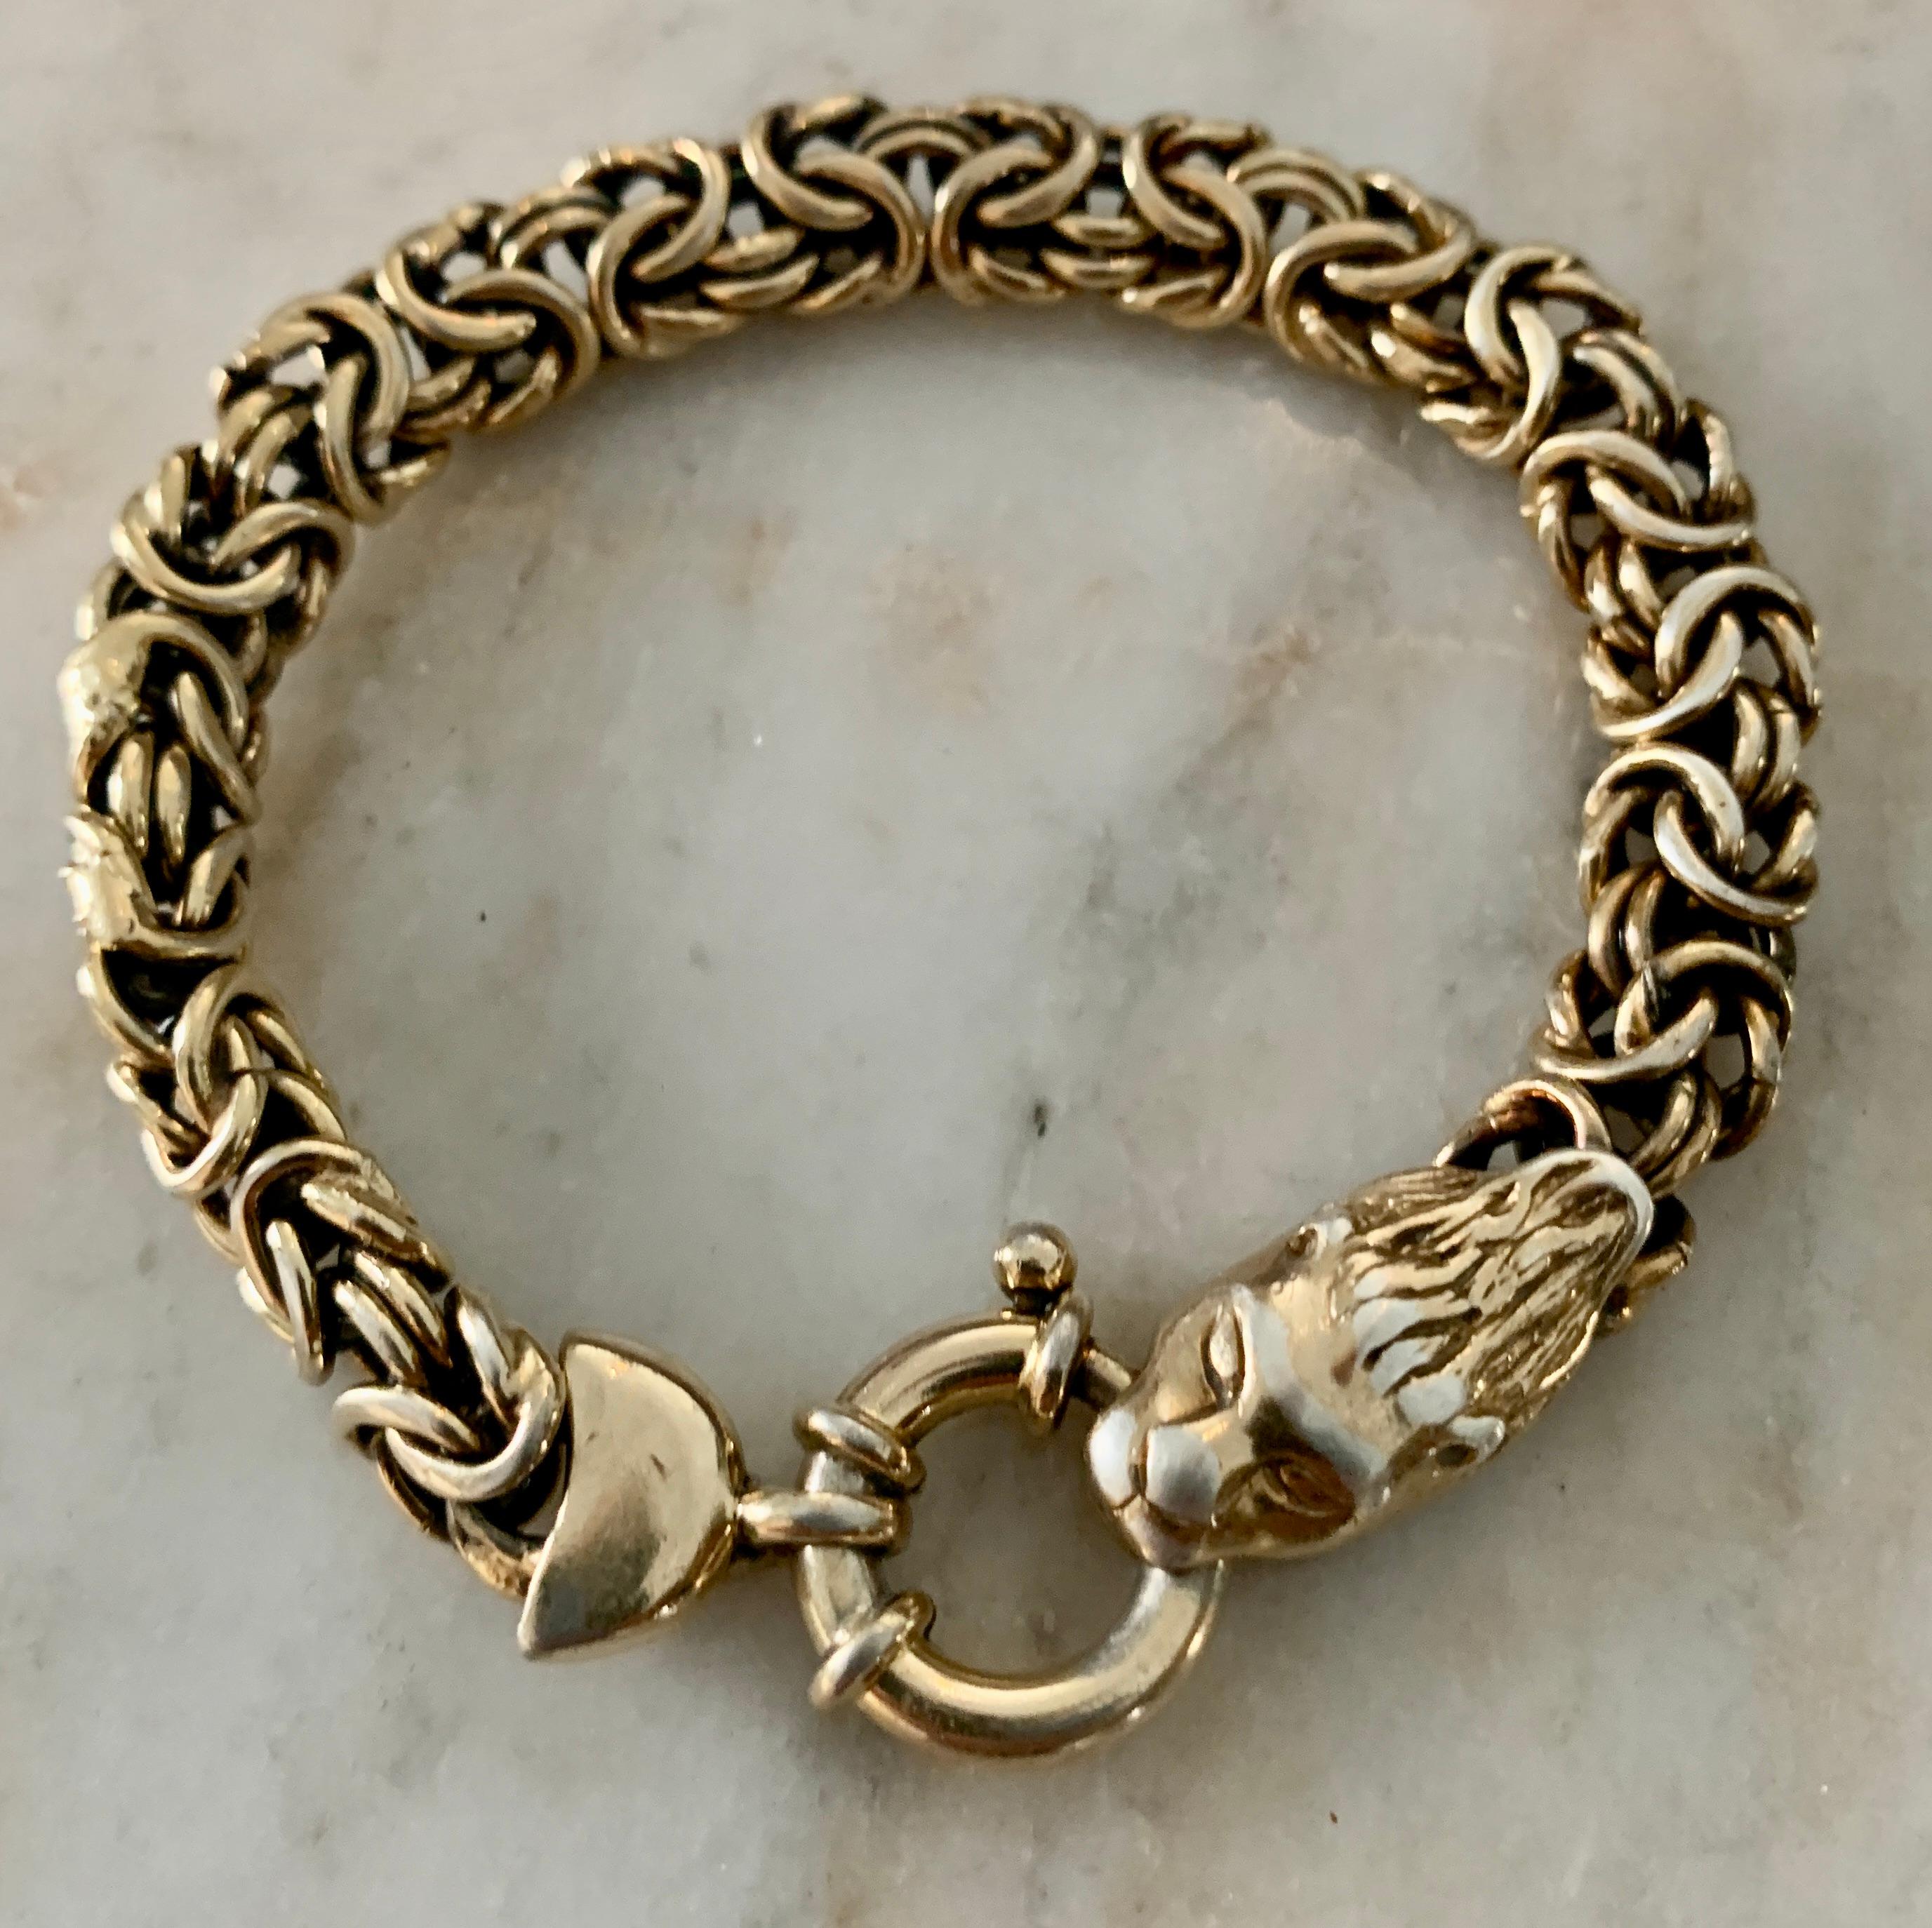 Beautiful chain mail bracelet, sexy and very and interesting with a lion closure.

When laid flat and open 7.5